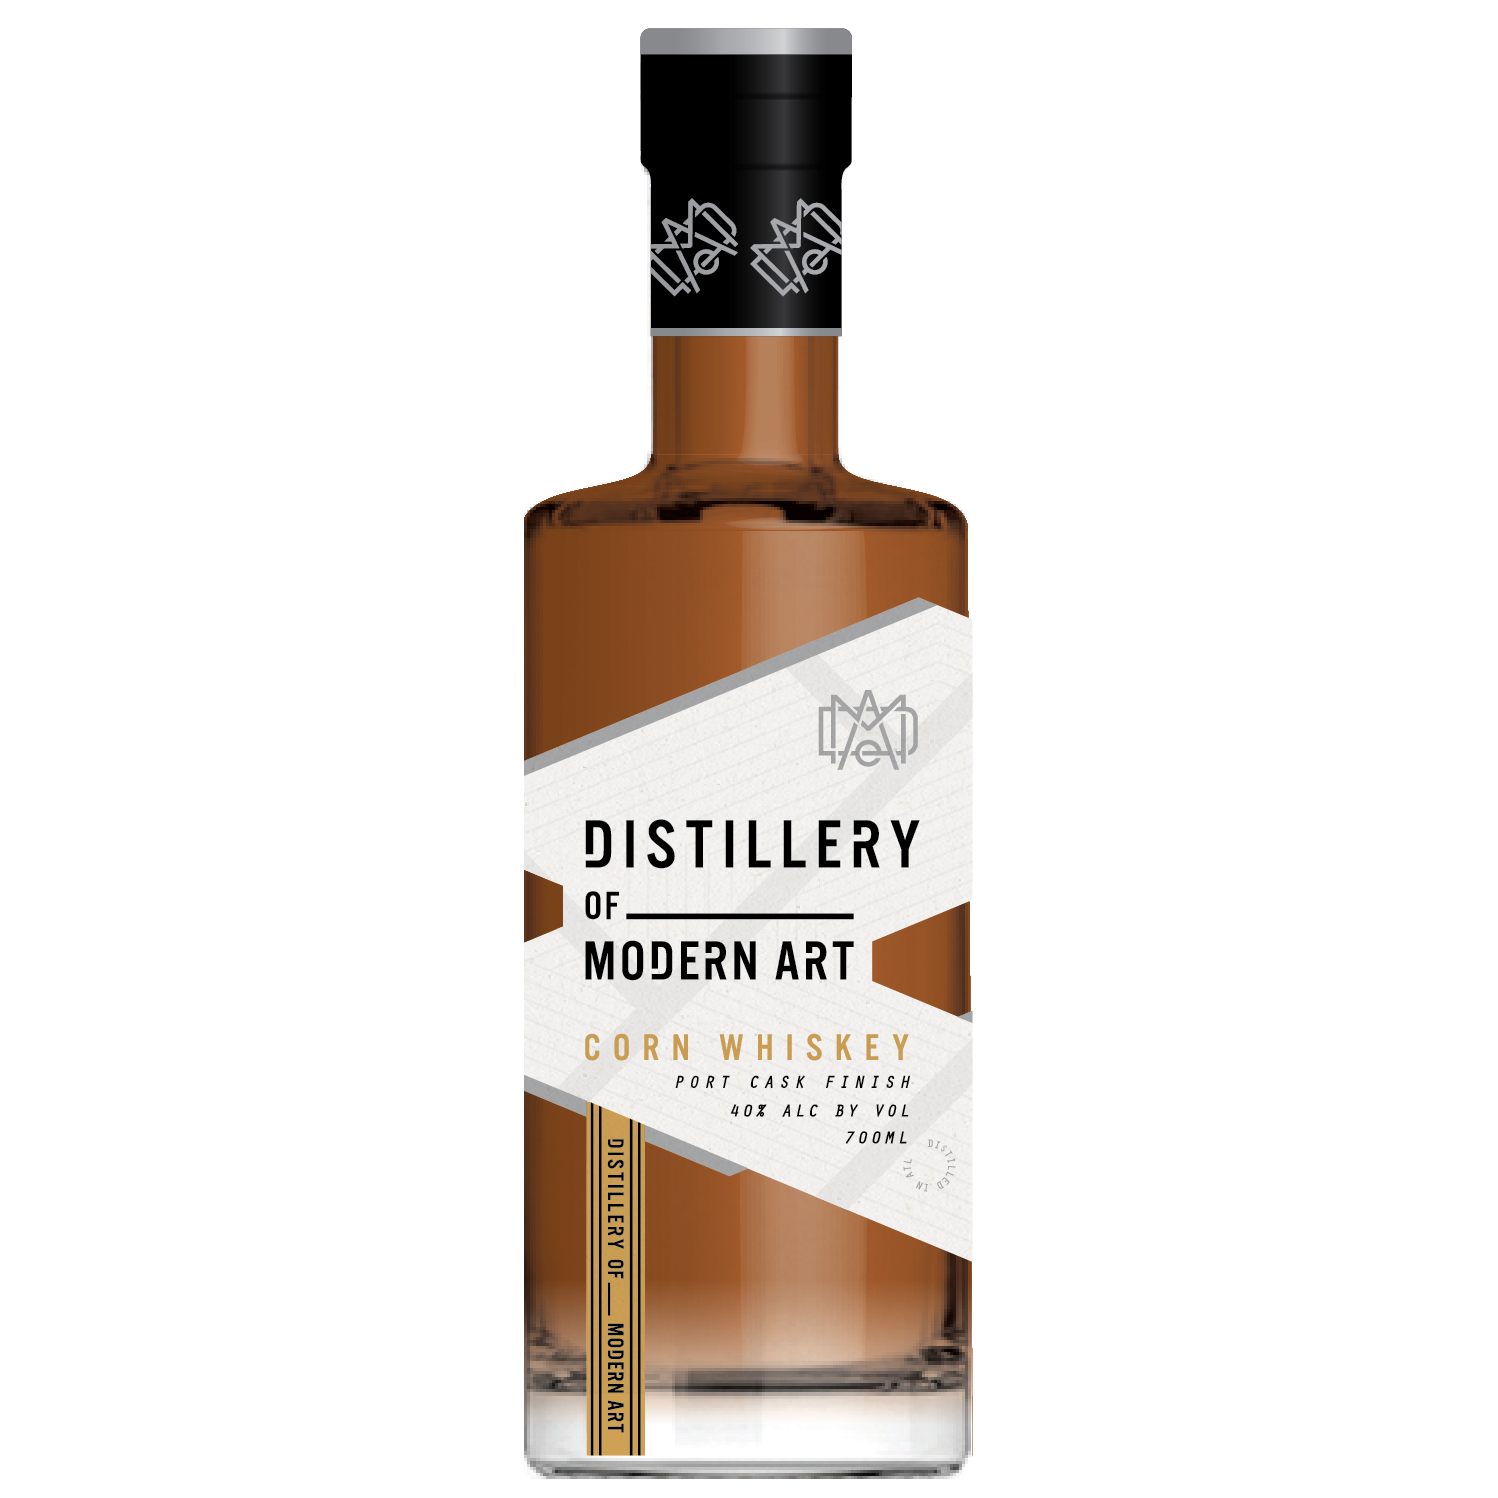 https://distilleryofmodernart.com/wp-content/uploads/2021/05/DOMA_Visual_Corn_Whiskey_Front.png